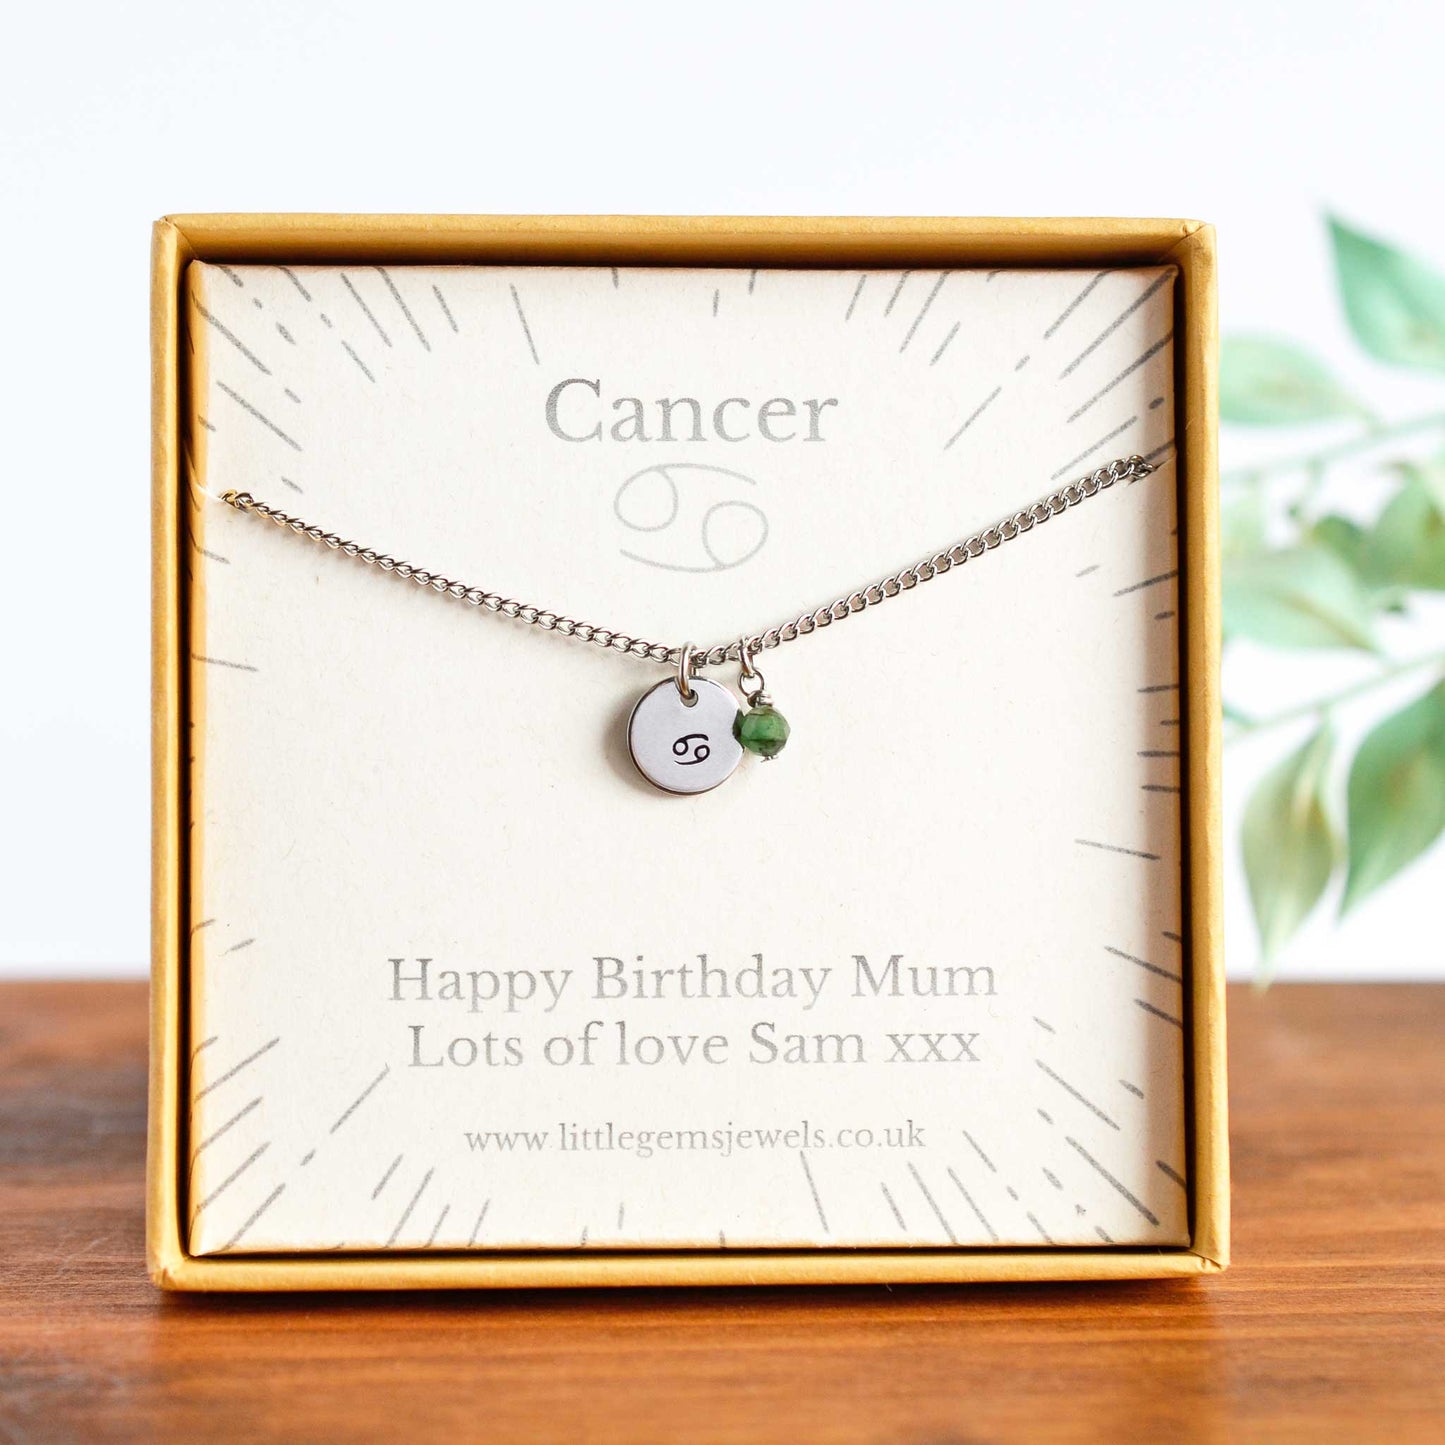 Cancer Zodiac necklace with personalised gift message in eco friendly gift box